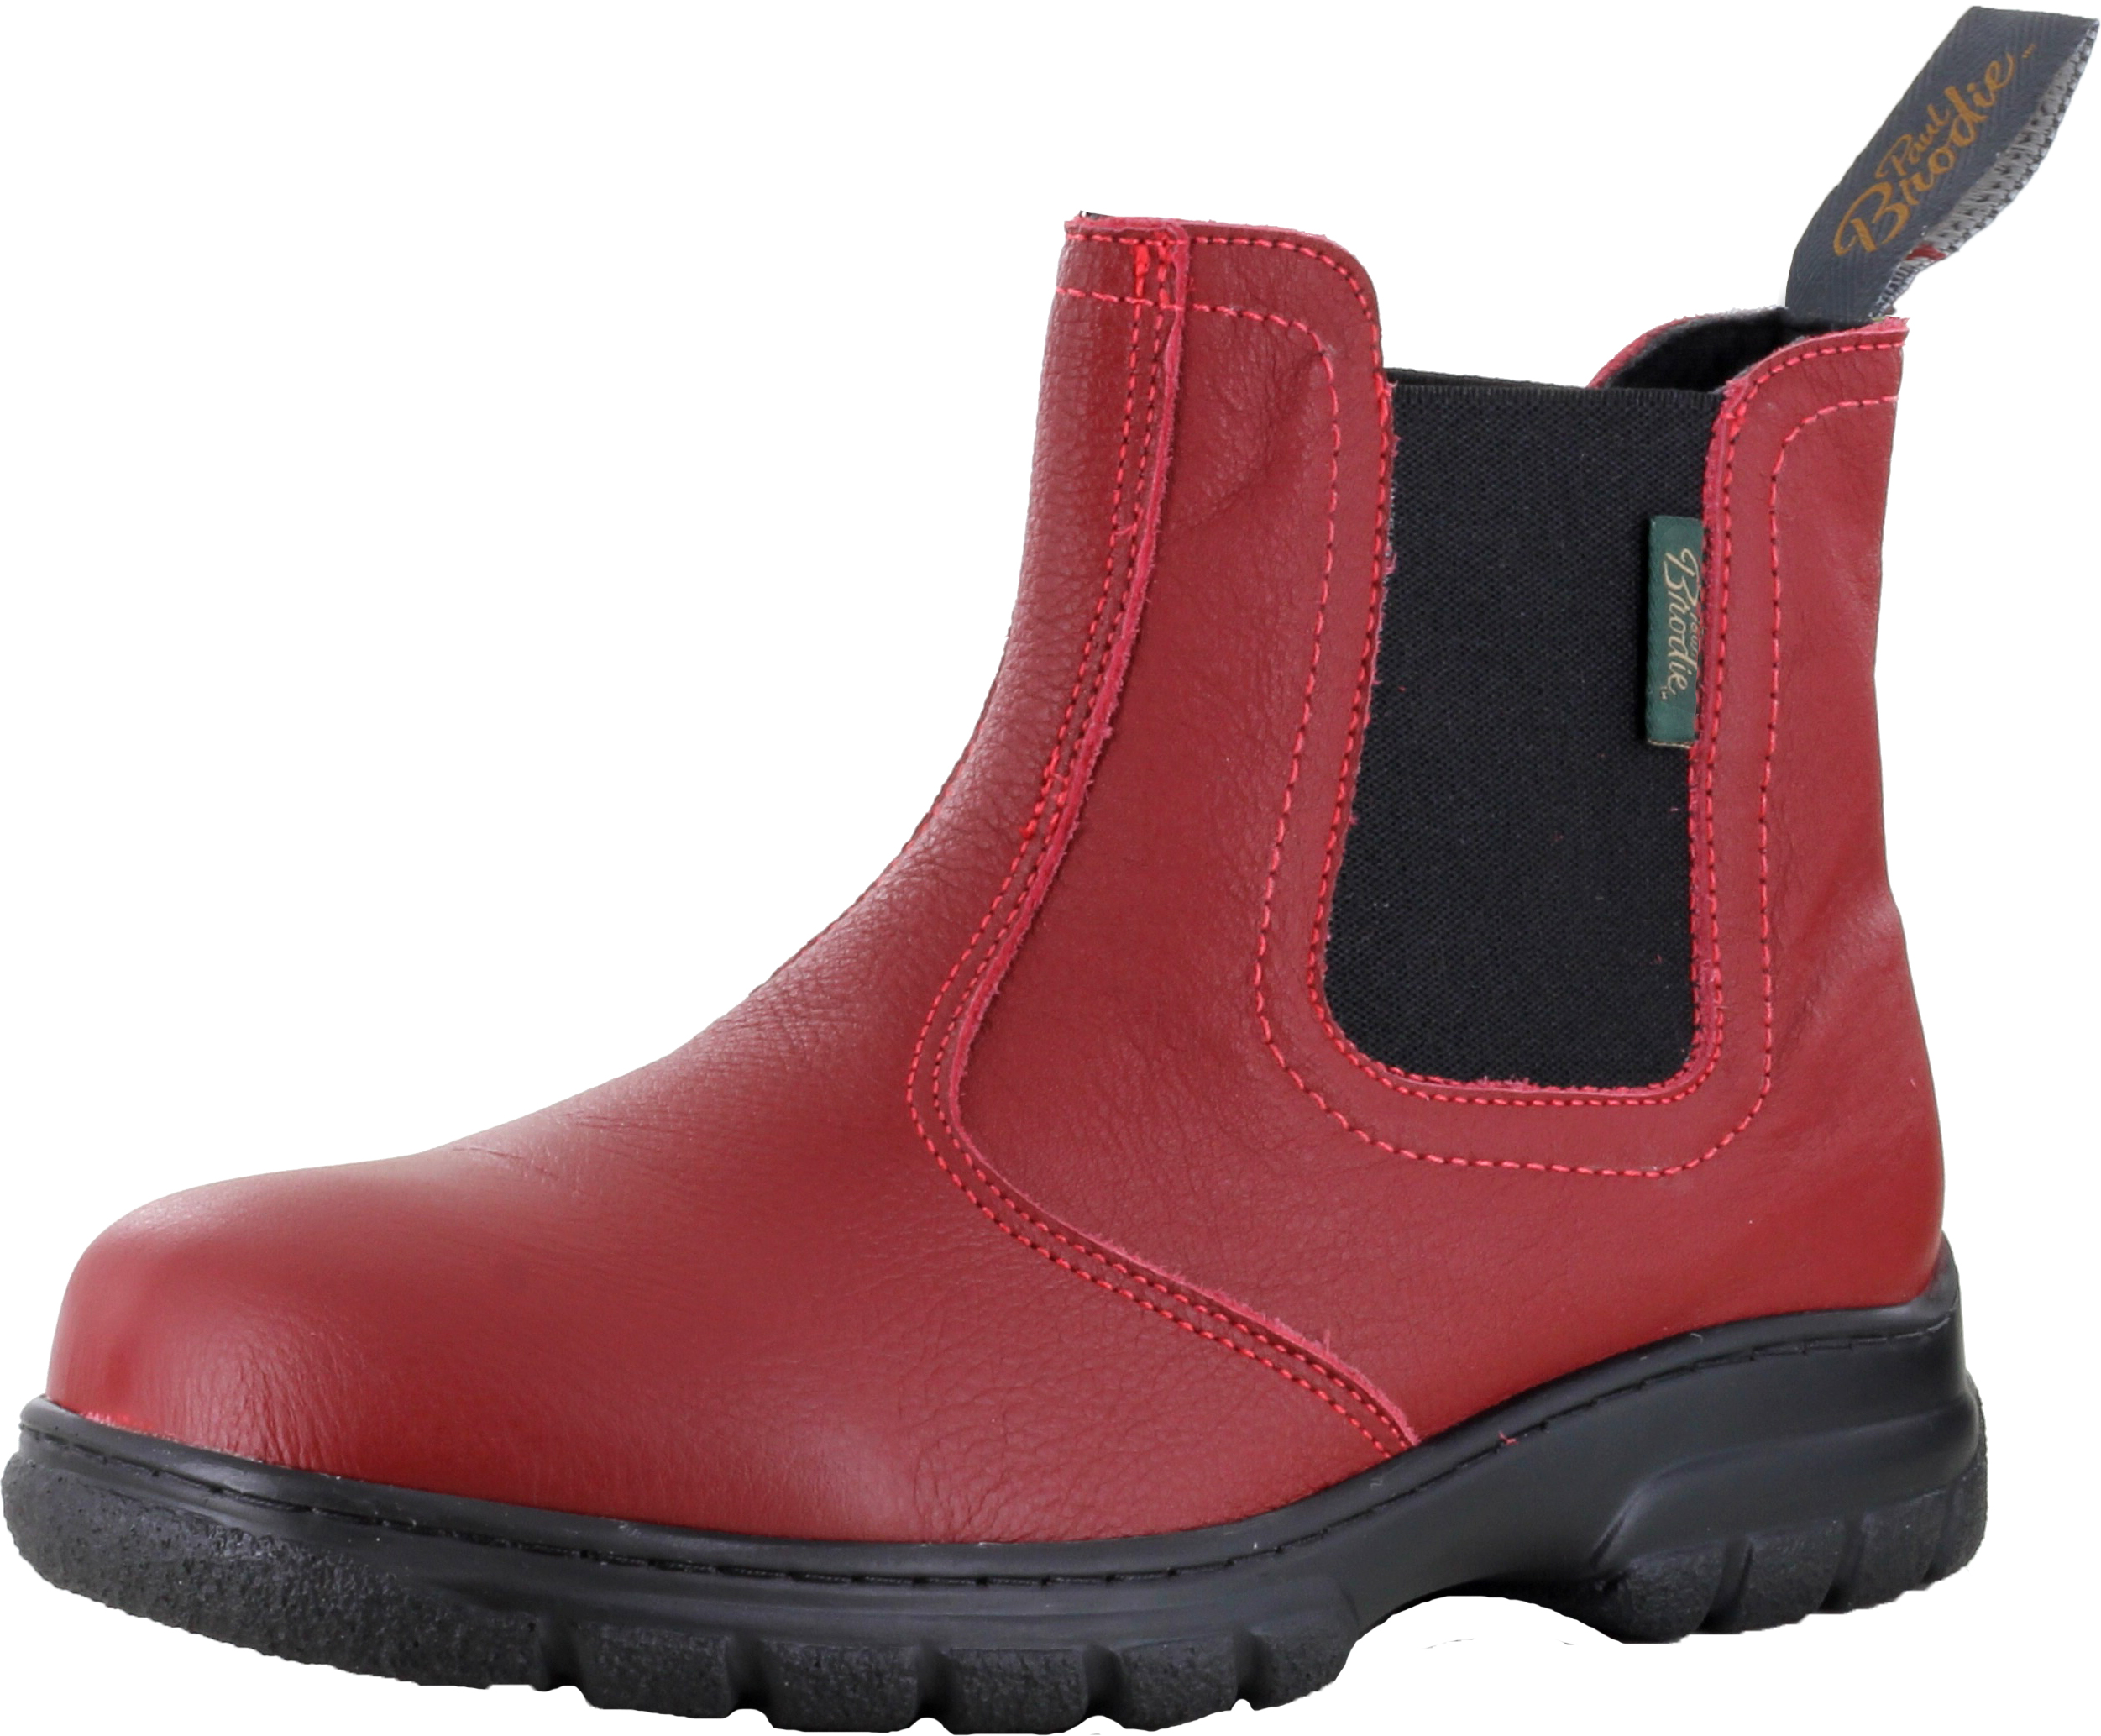 Paul Brodie Double Gore Boots - Red